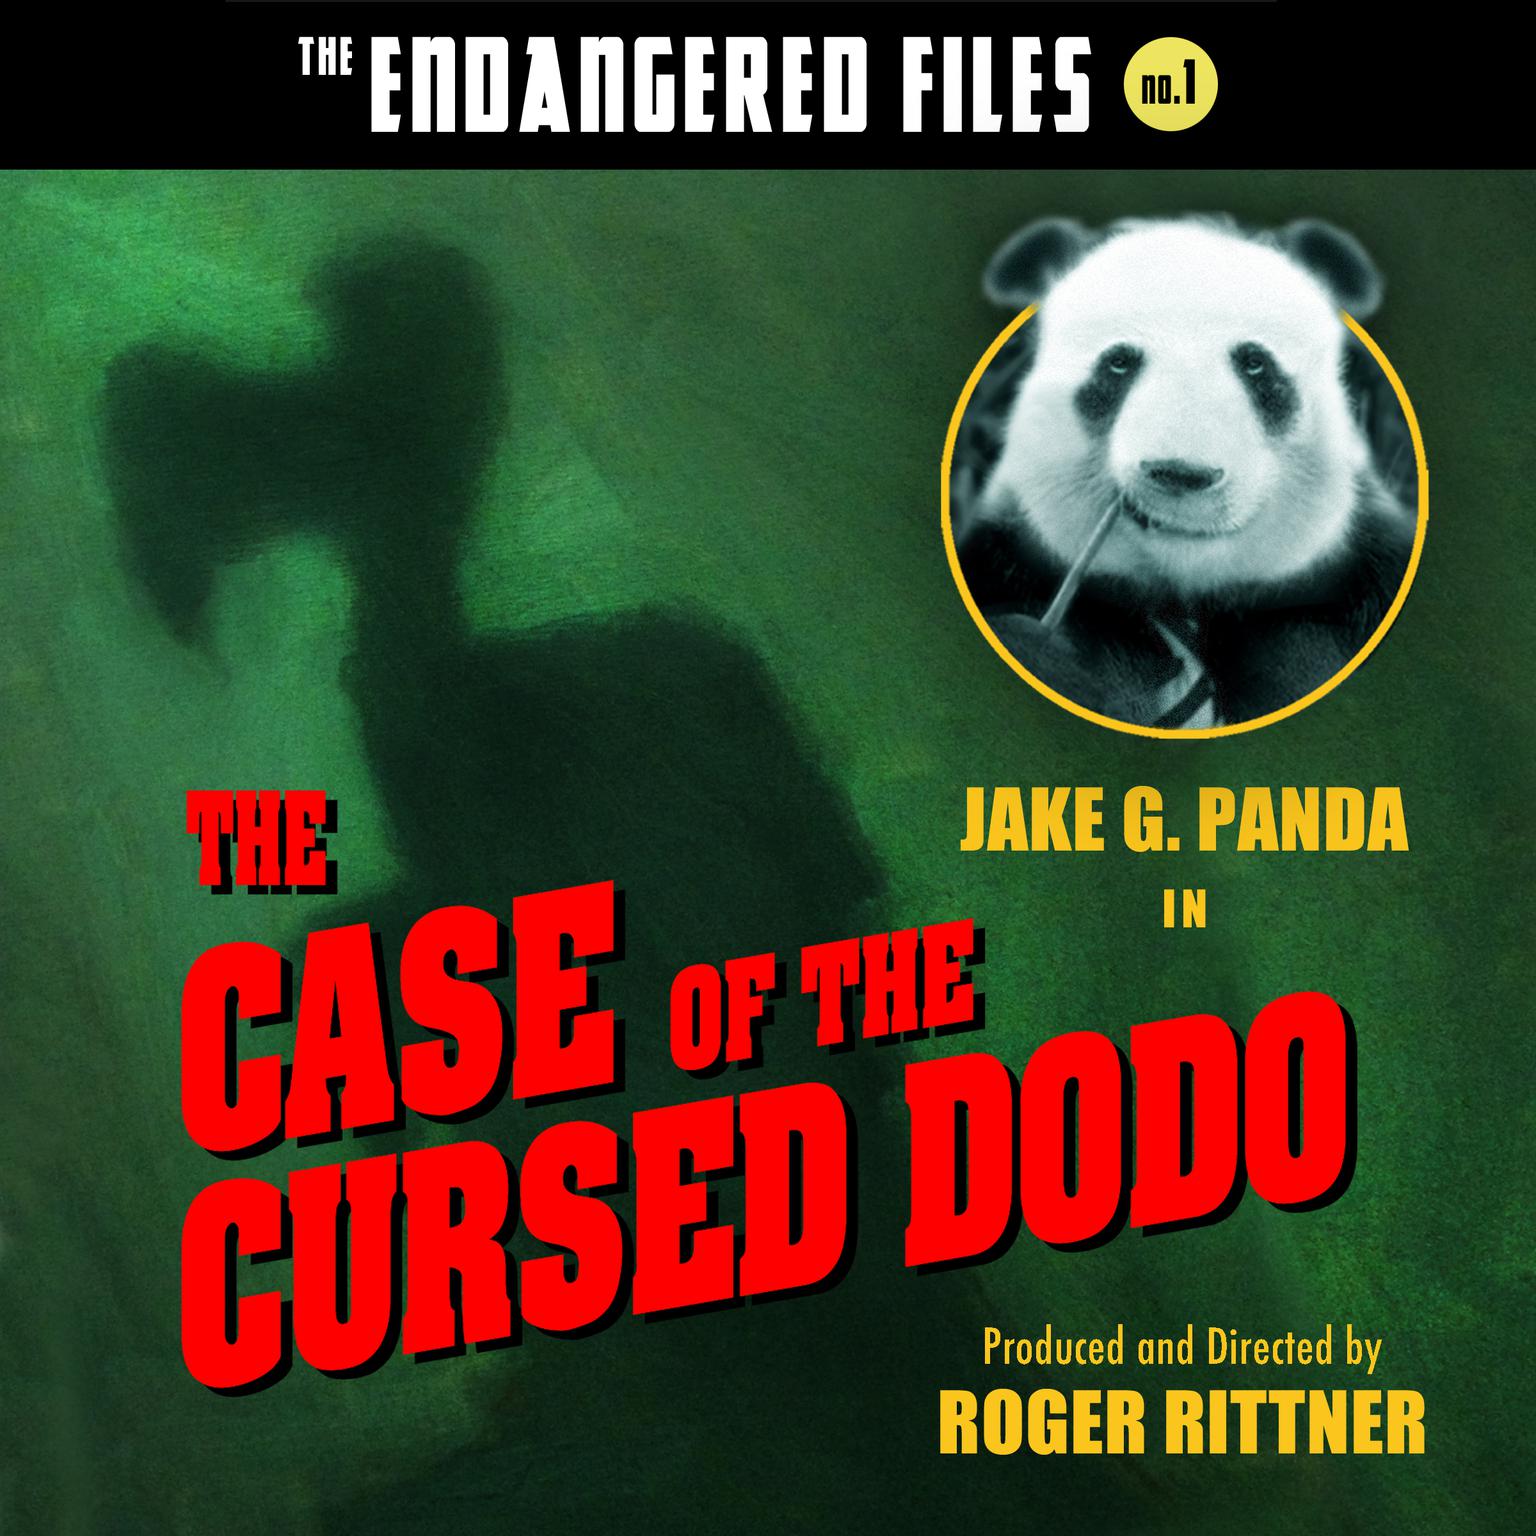 The Case of the Cursed Dodo (The Endangered Files: Book 1) Audiobook, by Jake G. Panda